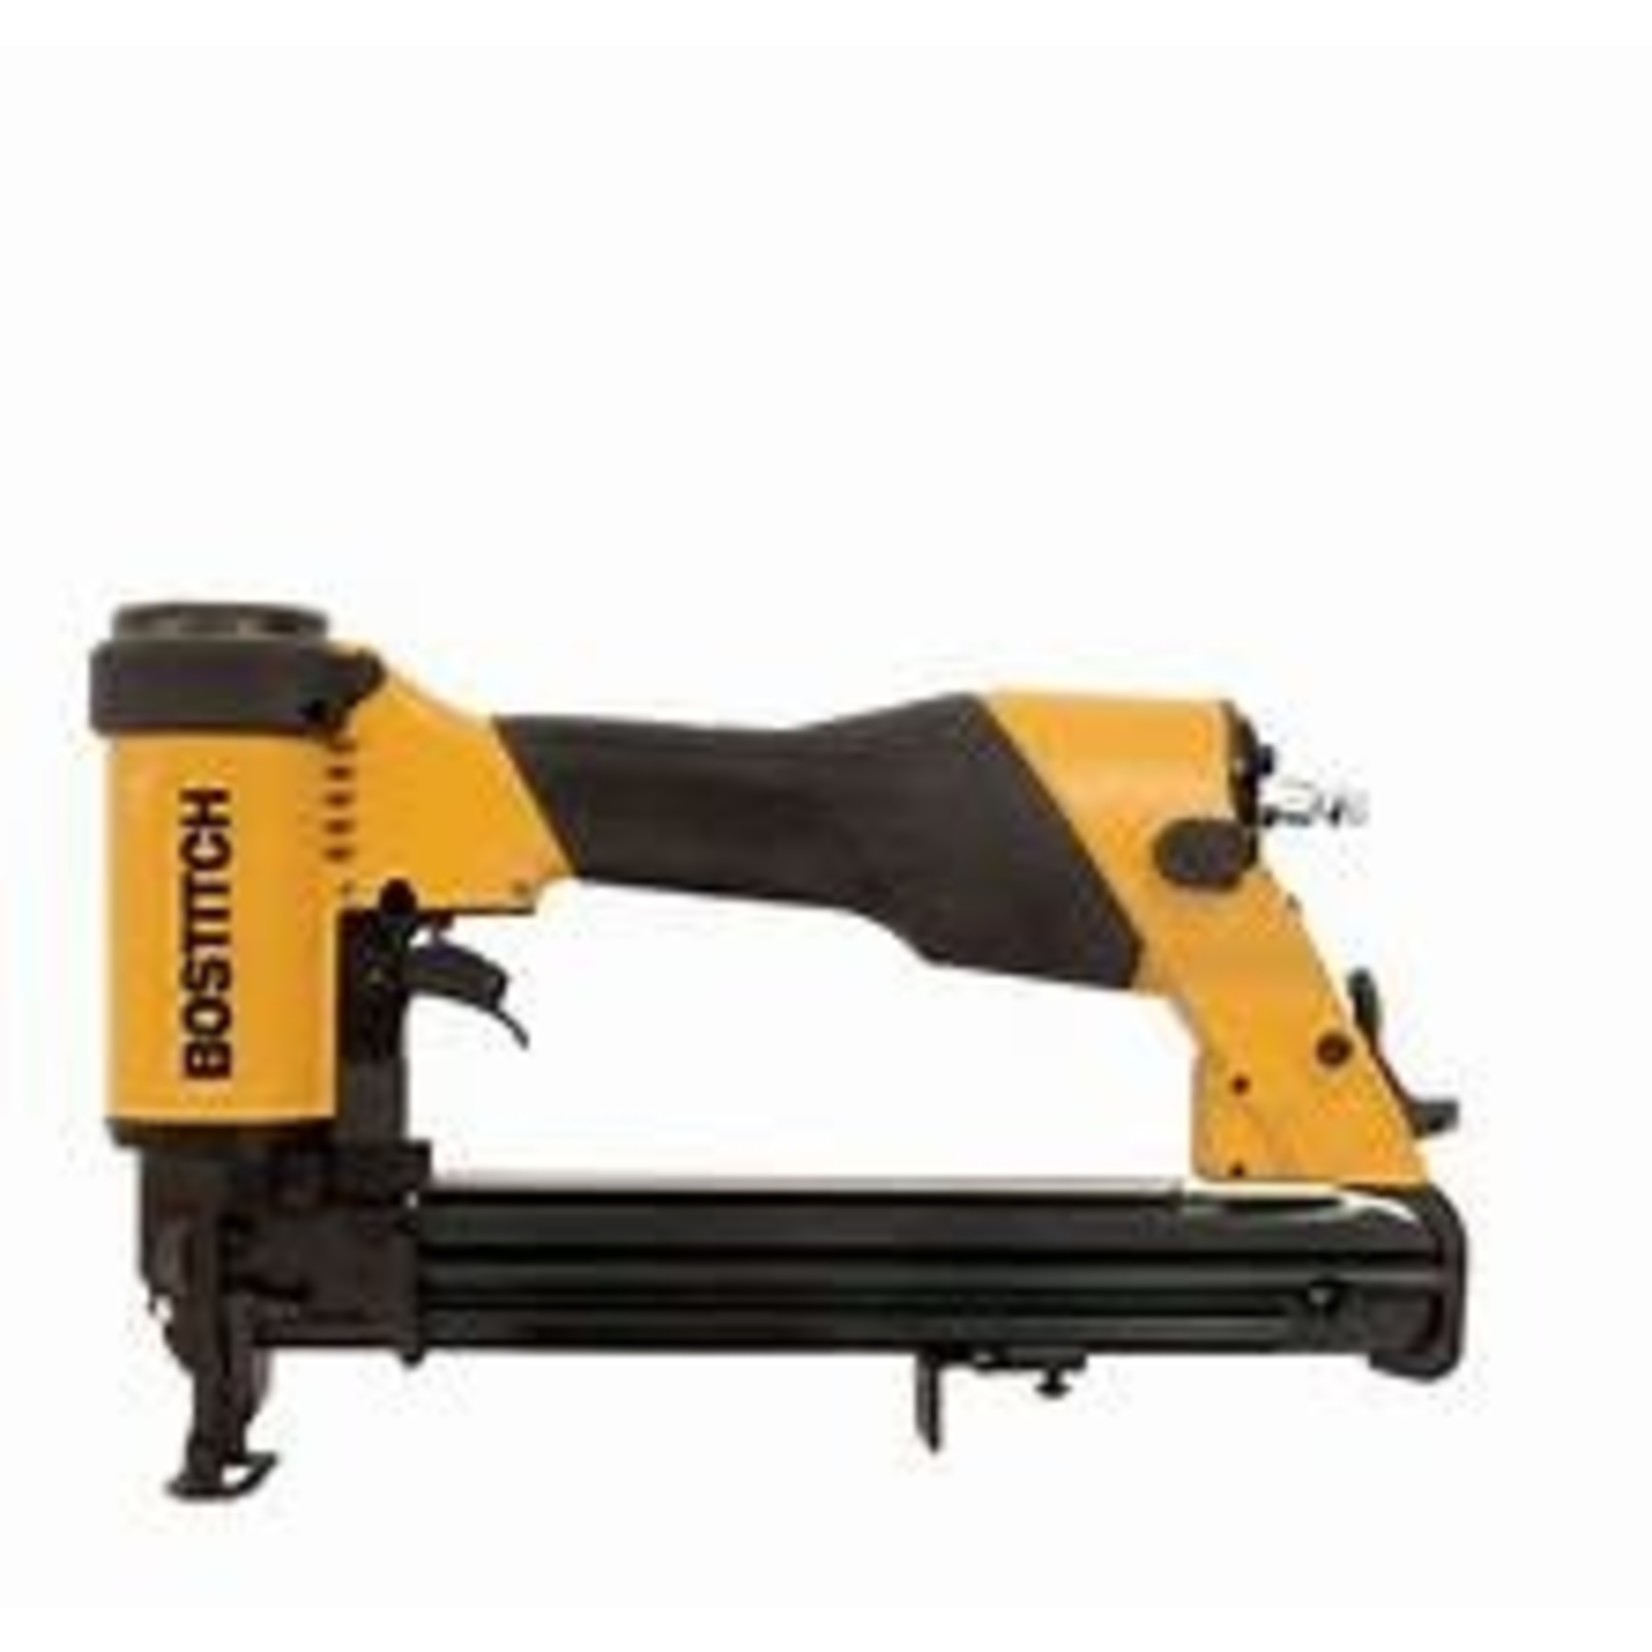 AIR TOOLS - BOSTITCH T40 ROOFING STAPLER